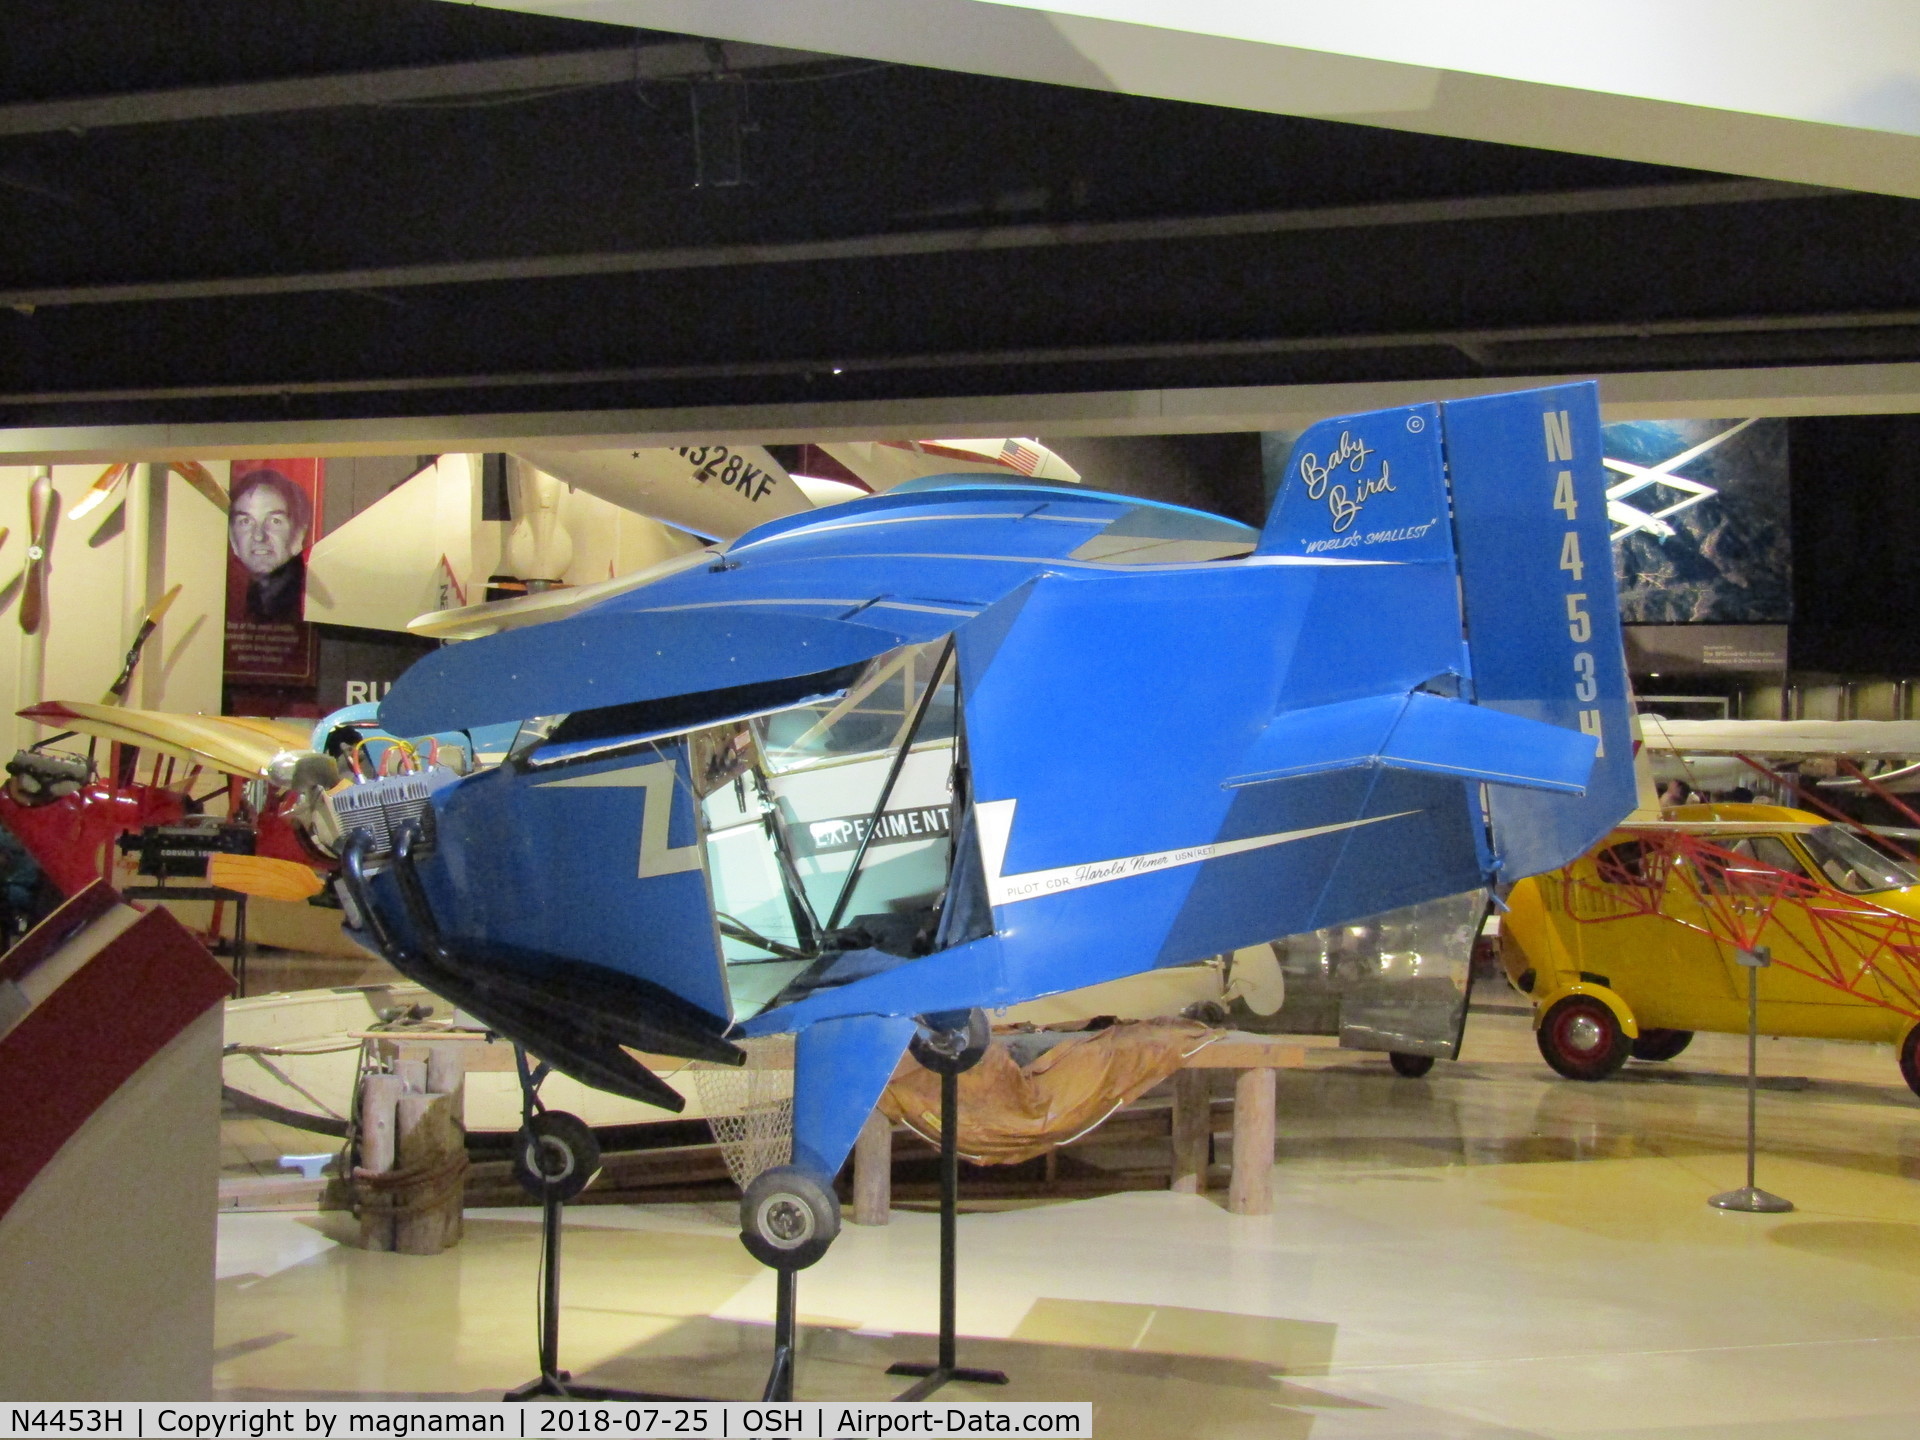 N4453H, 1983 Stits DS-1 C/N 001, At EAA museum